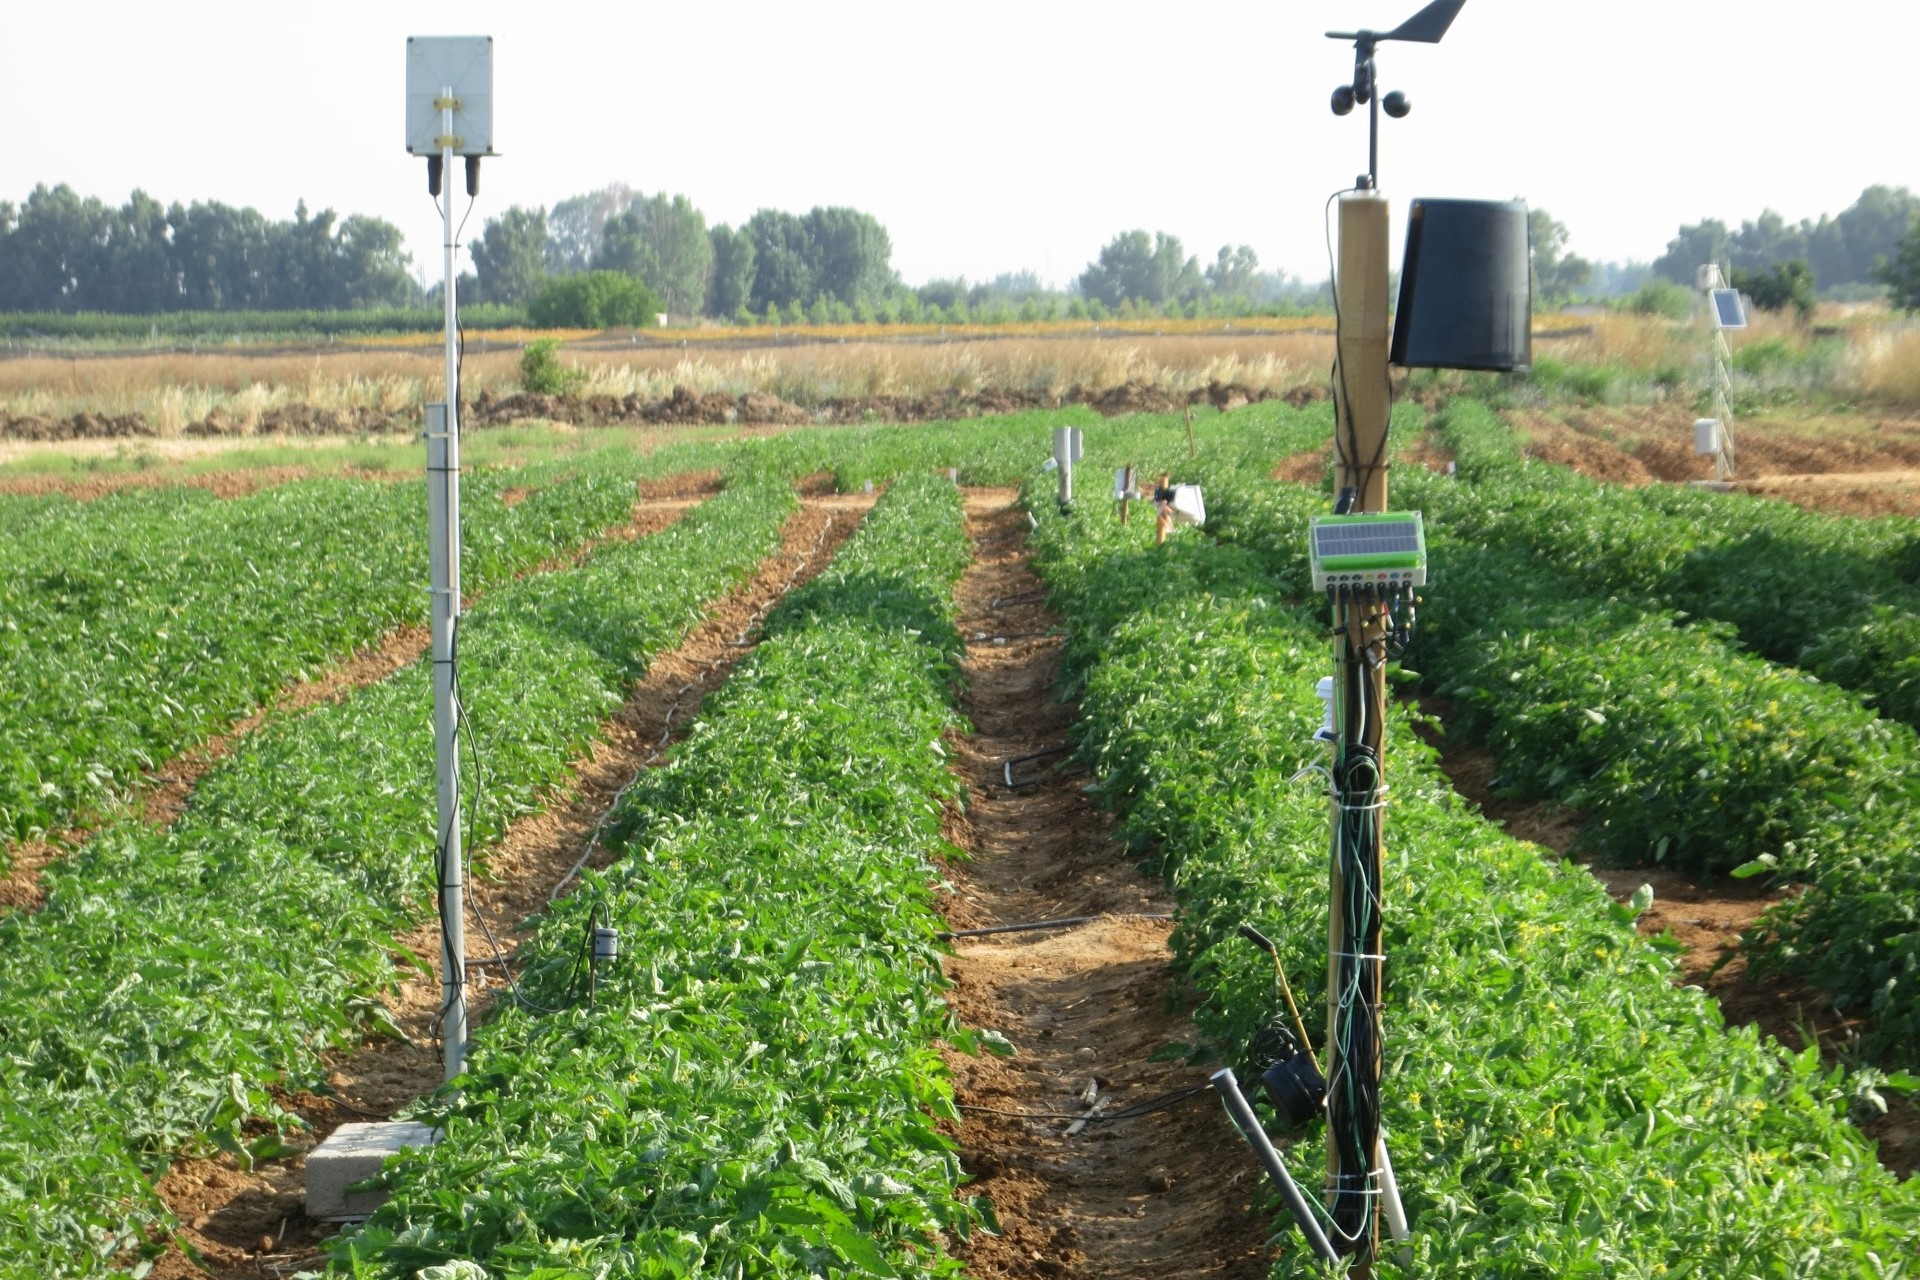 Sensors for measuring soil and ambient humidity in tomato plots